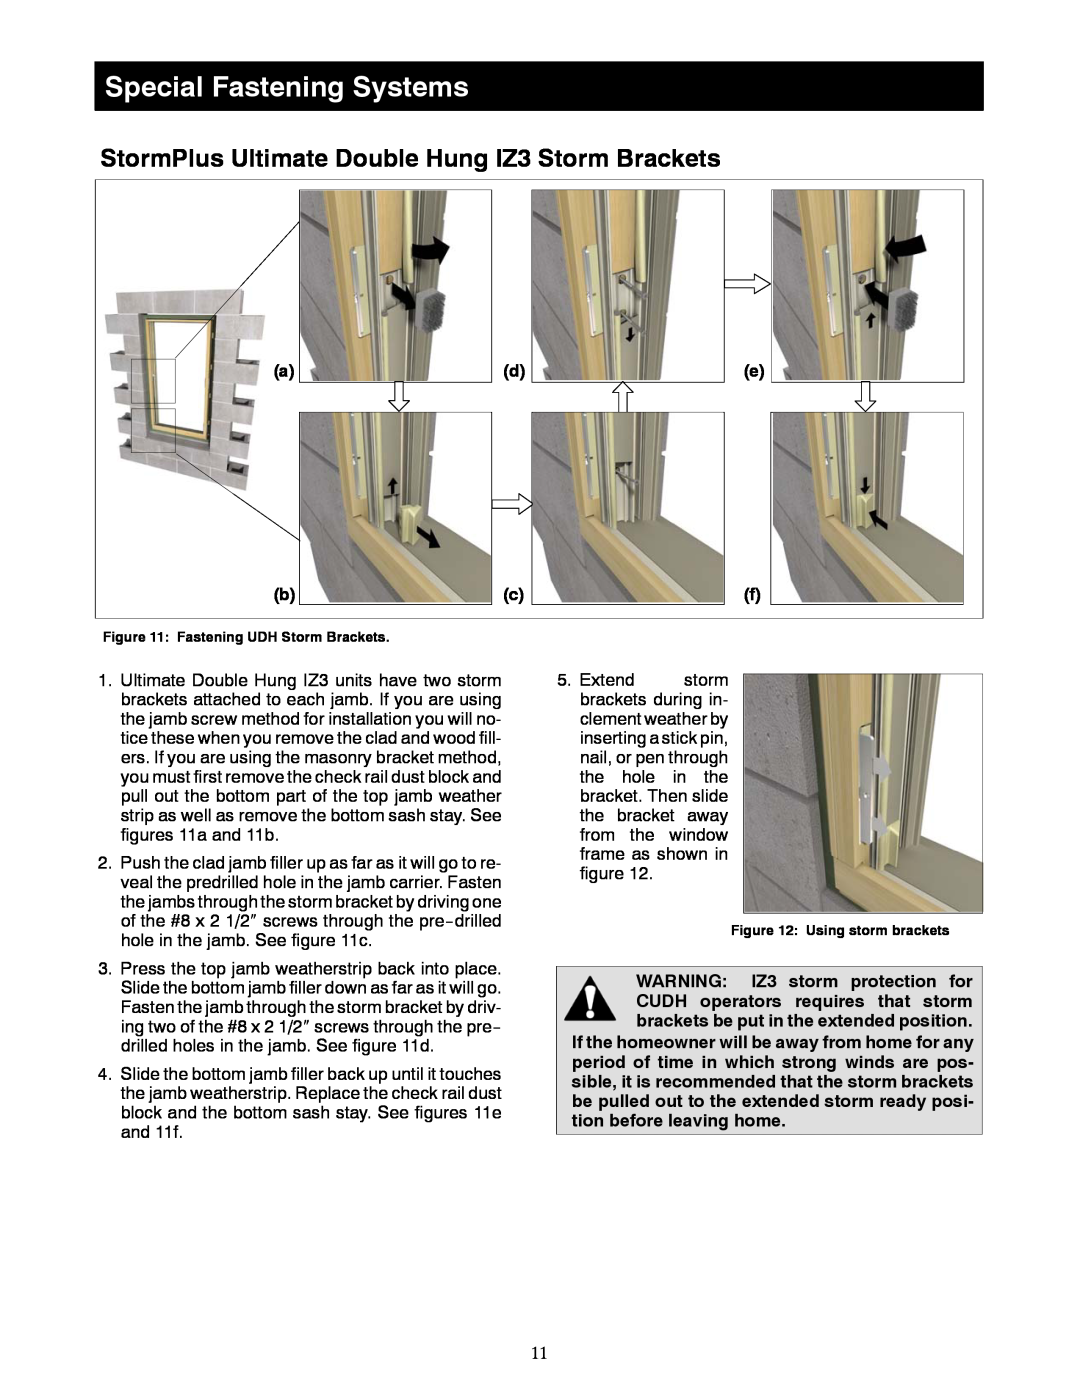 Marvin Window manual Special Fastening Systems, StormPlus Ultimate Double Hung IZ3 Storm Brackets 